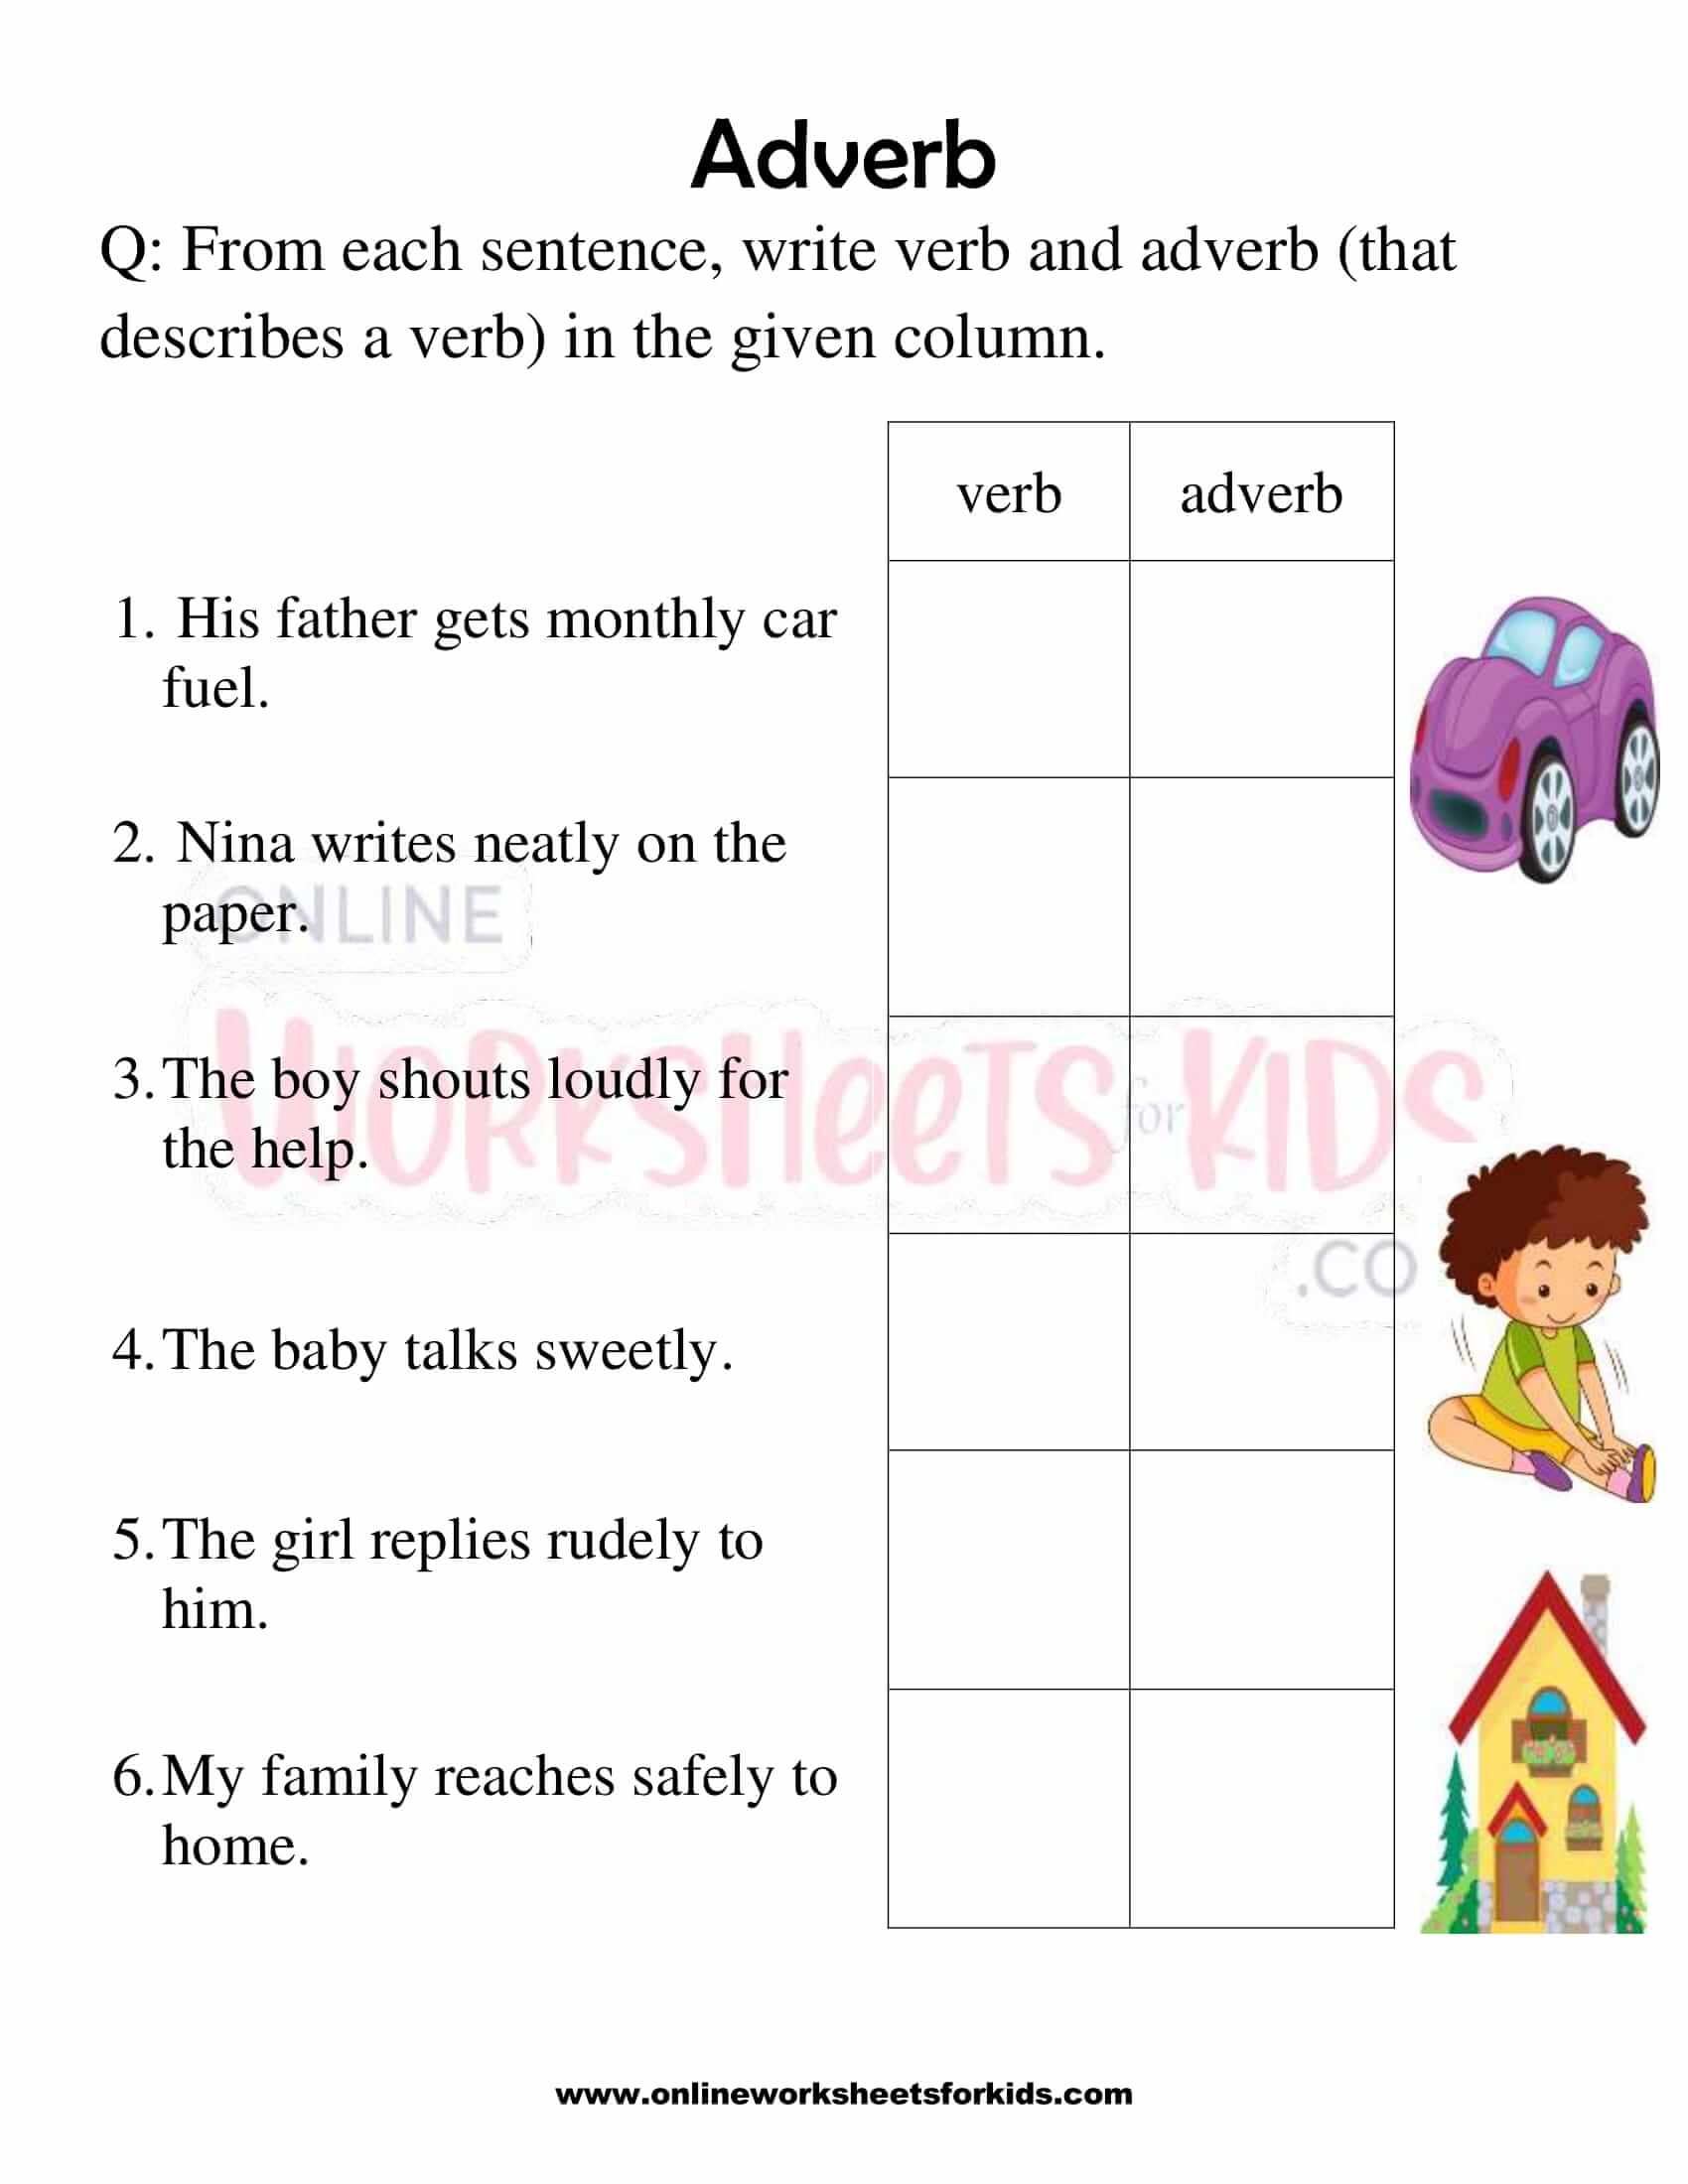 Adverb Live Worksheet For Class 5